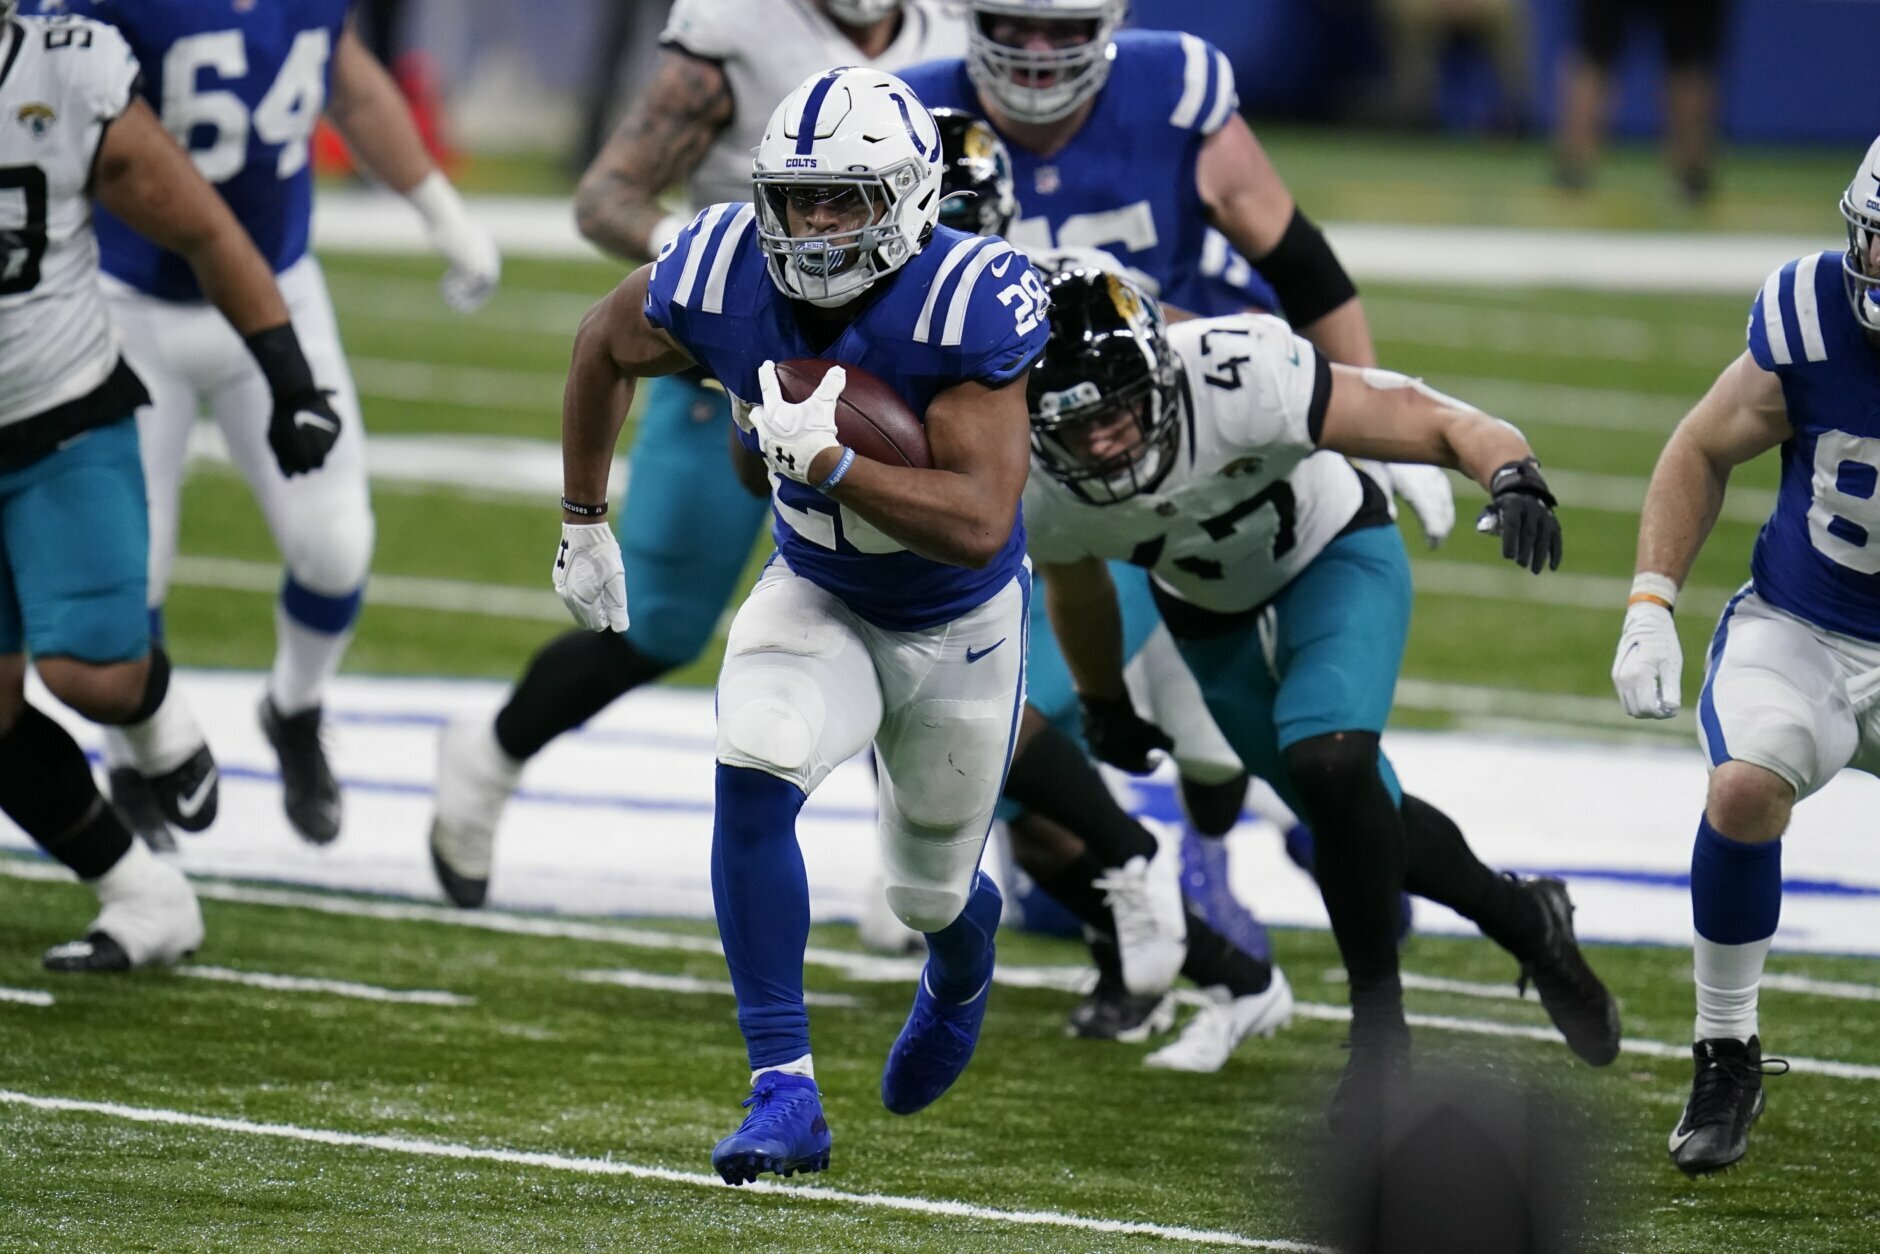 <p><em><strong>Jaguars 14</strong></em><br />
<em><strong>Colts 28</strong></em></p>
<p>It turns out this wasn&#8217;t Philip Rivers&#8217; last game. That comes Saturday in Buffalo. But until then, give it up for Jonathan Taylor setting the Colts franchise record with 253 rushing yards in a game. It&#8217;ll be interesting to see if Indy tries to rehabilitate Carson Wentz, which would be a damn good long-term option at QB if Frank Reich can pull it off.</p>
<p>Jacksonville is officially on the clock for the first pick in the 2021 NFL draft. The Jaguars wouldn&#8217;t hire Urban Meyer or Ryan Day and then take Sugar Bowl hero Justin Fields, would they?</p>
